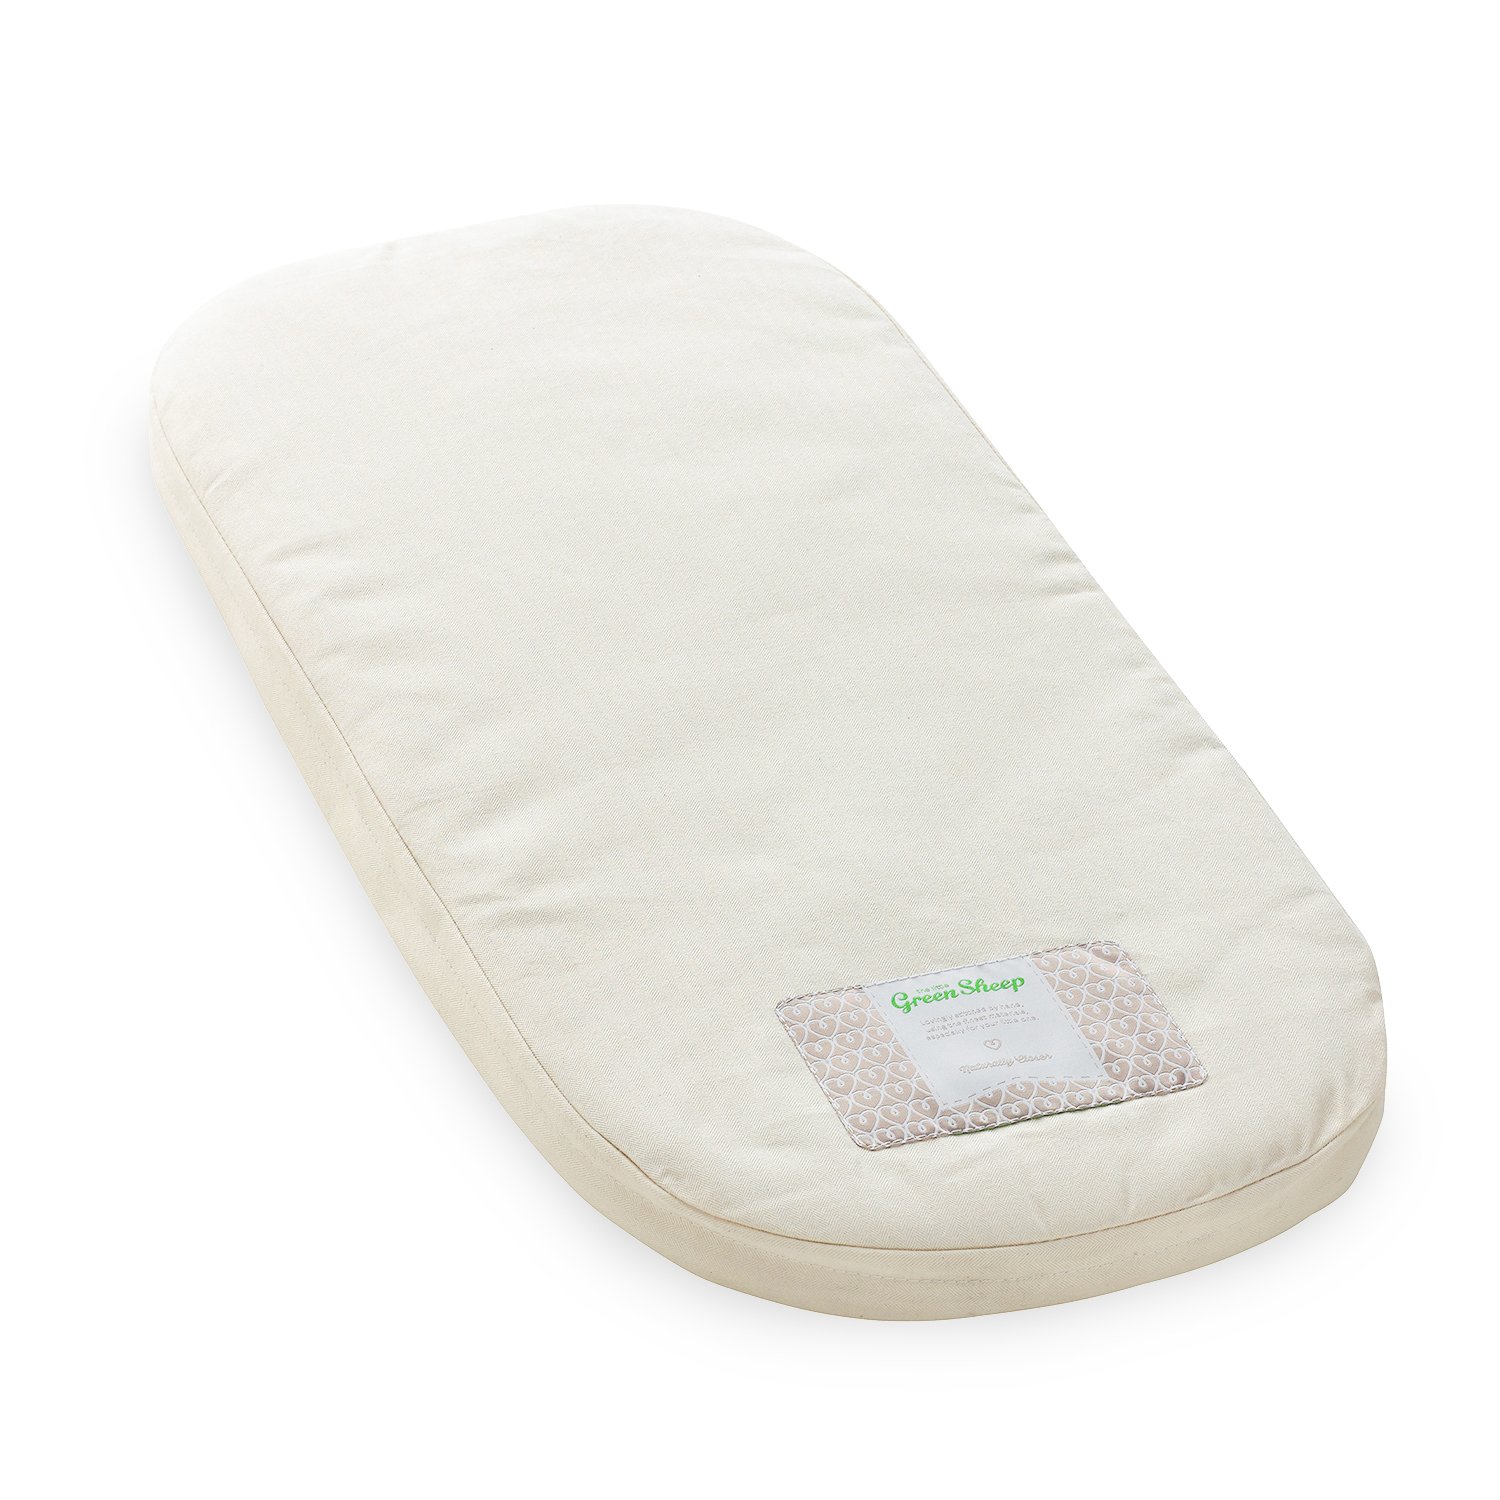 The Little Green Sheep Natural Carrycot Mattress for UppaBaby Vista and Cruz